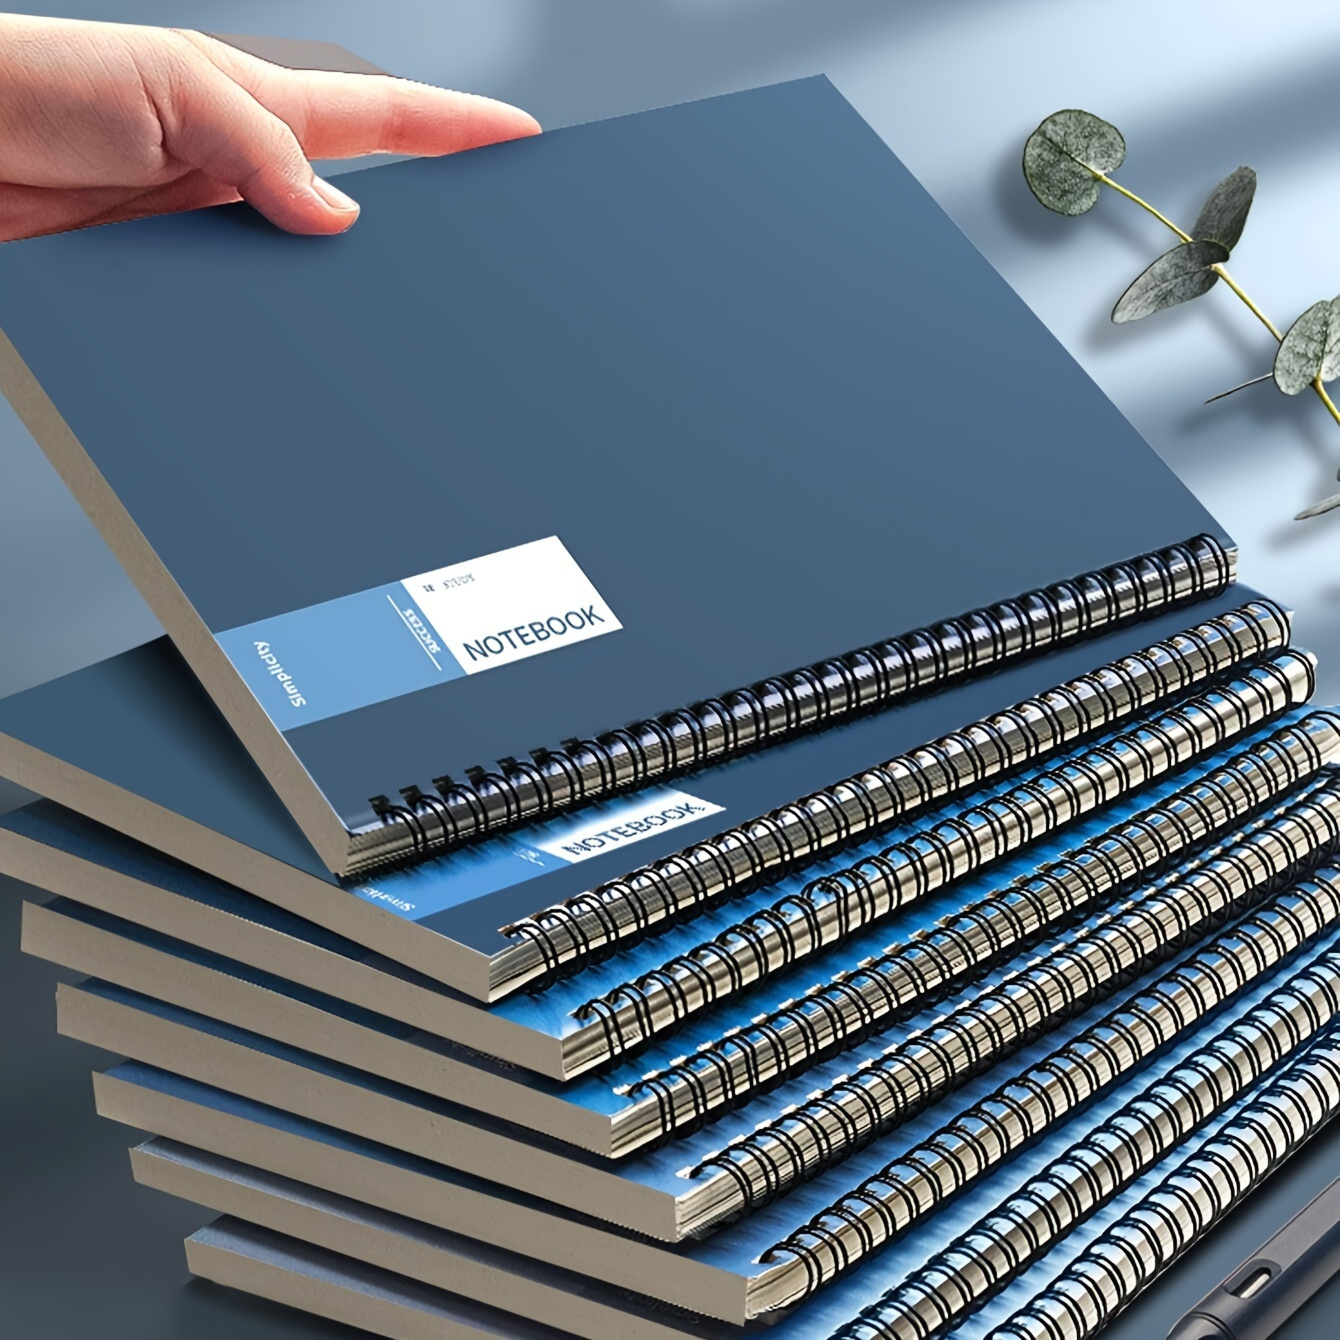 

4-piece A5 Spiral Notebooks In Gradient Blue, 320 Pages Total - Ideal For Students & Professionals